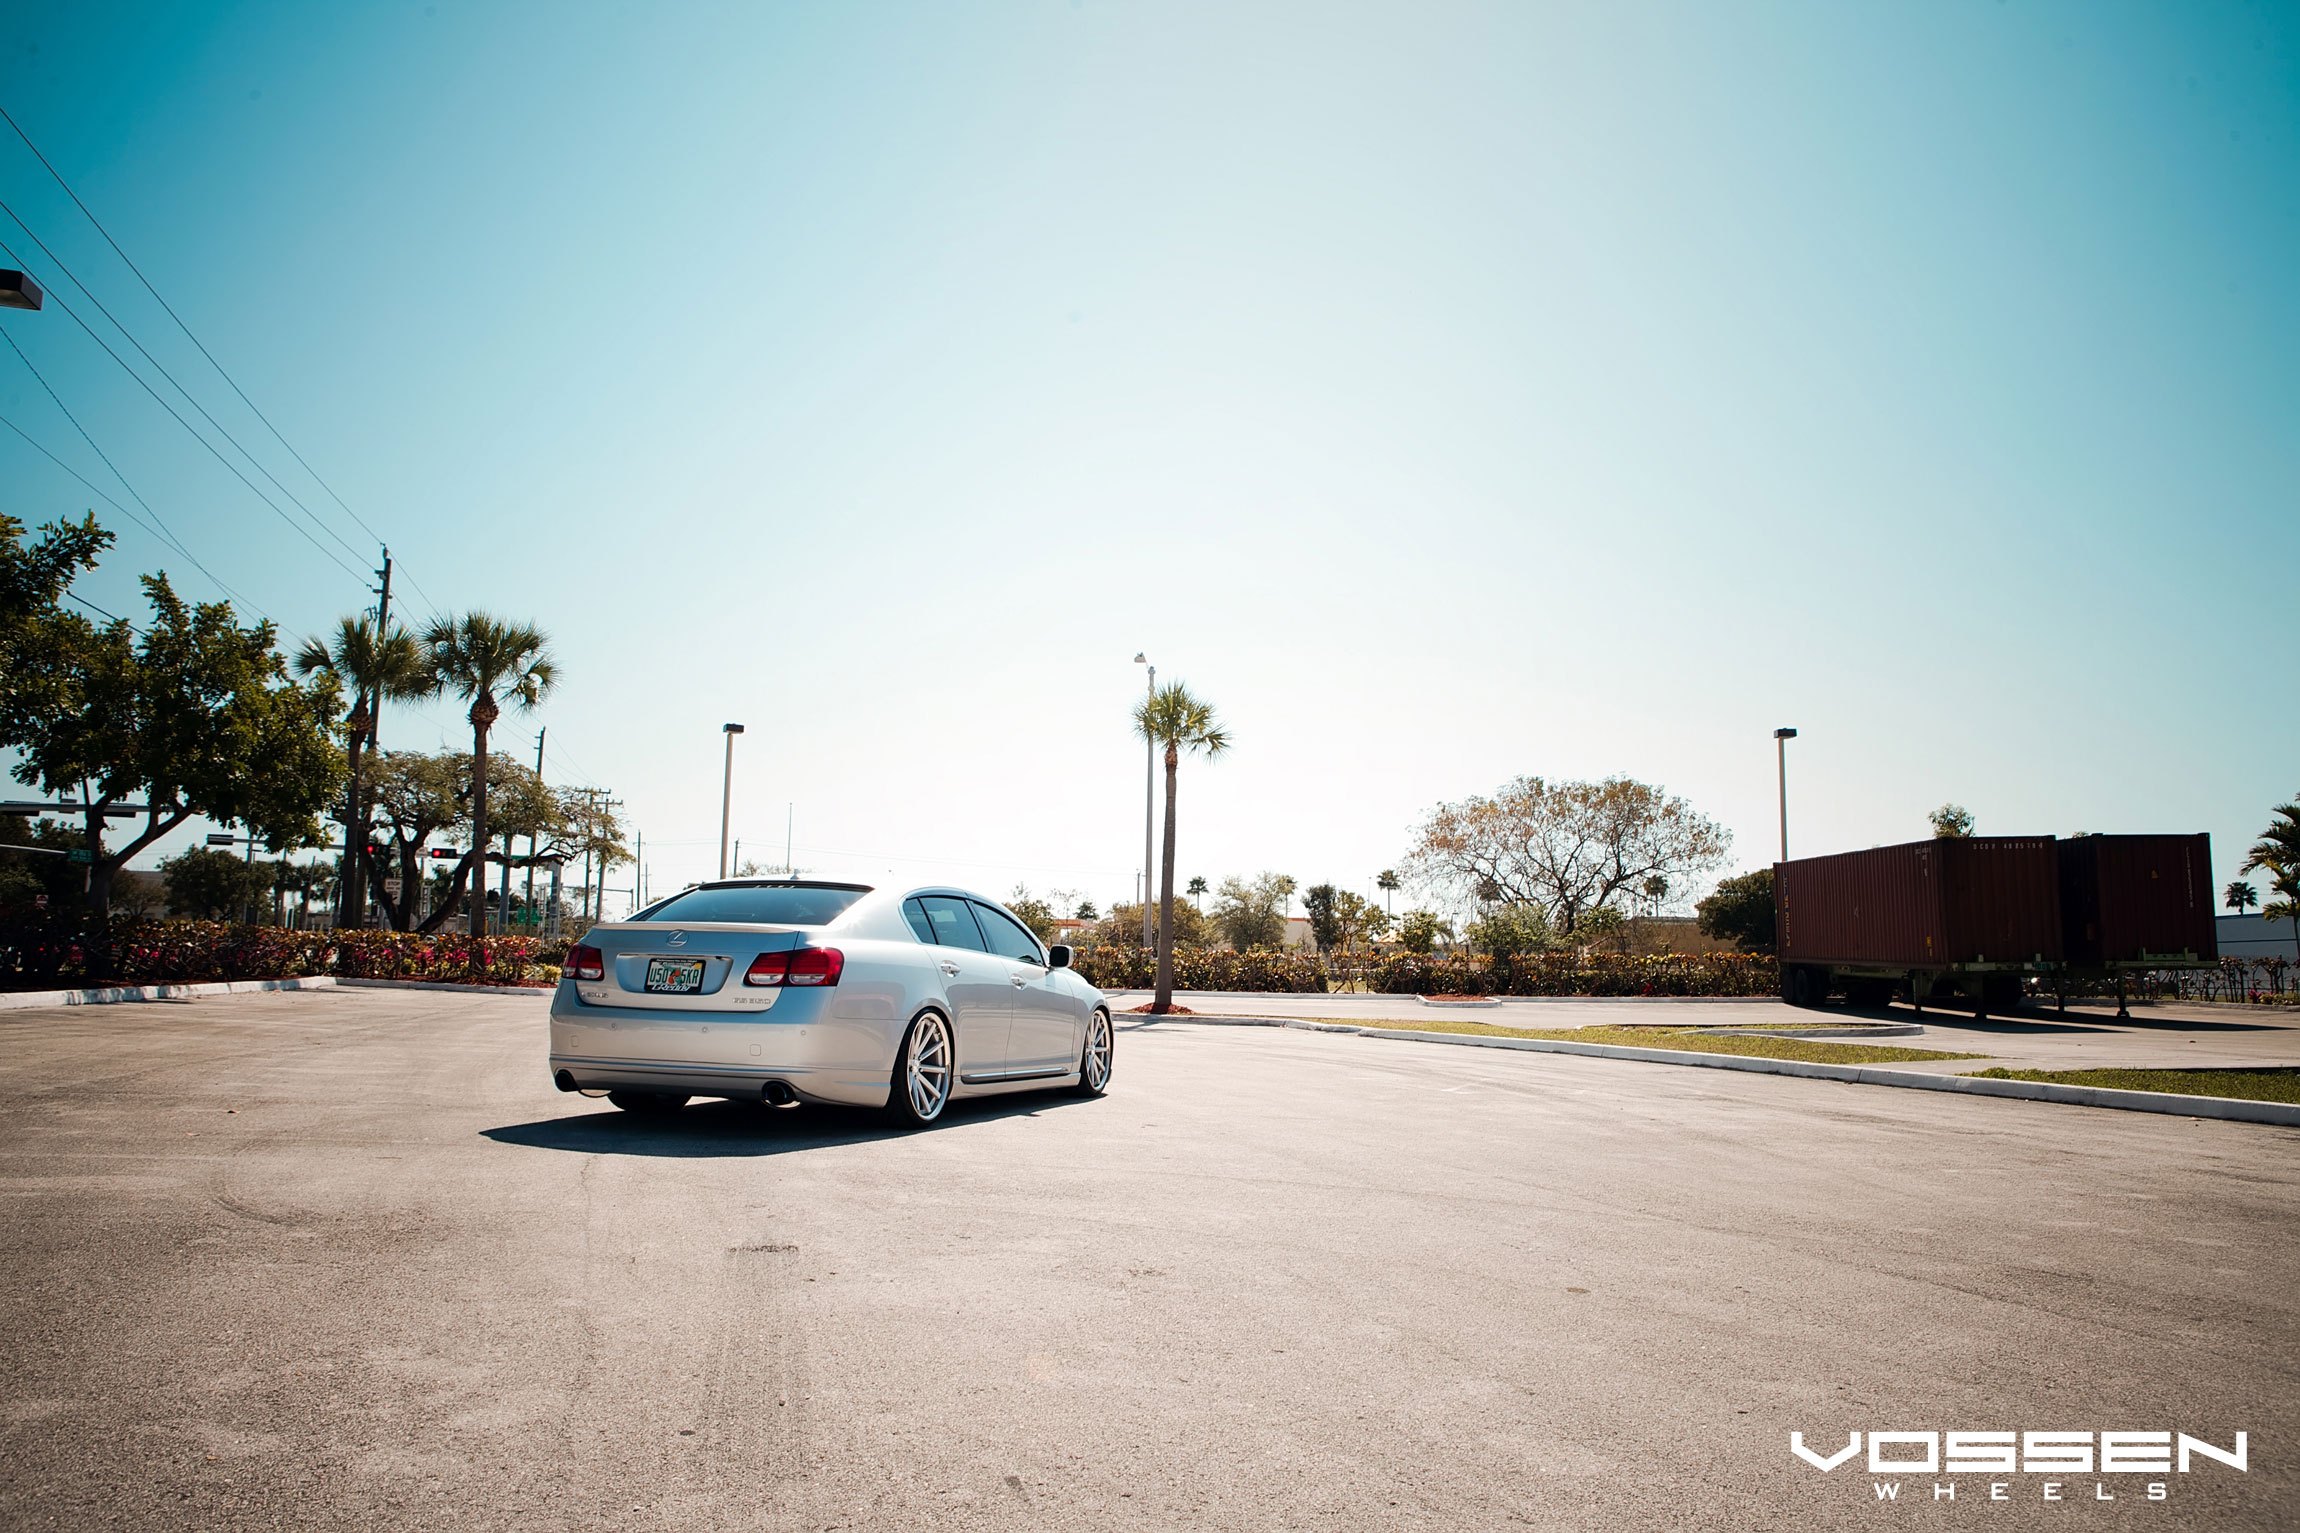 Silver Lexus GS with Red Taillights - Photo by Vossen